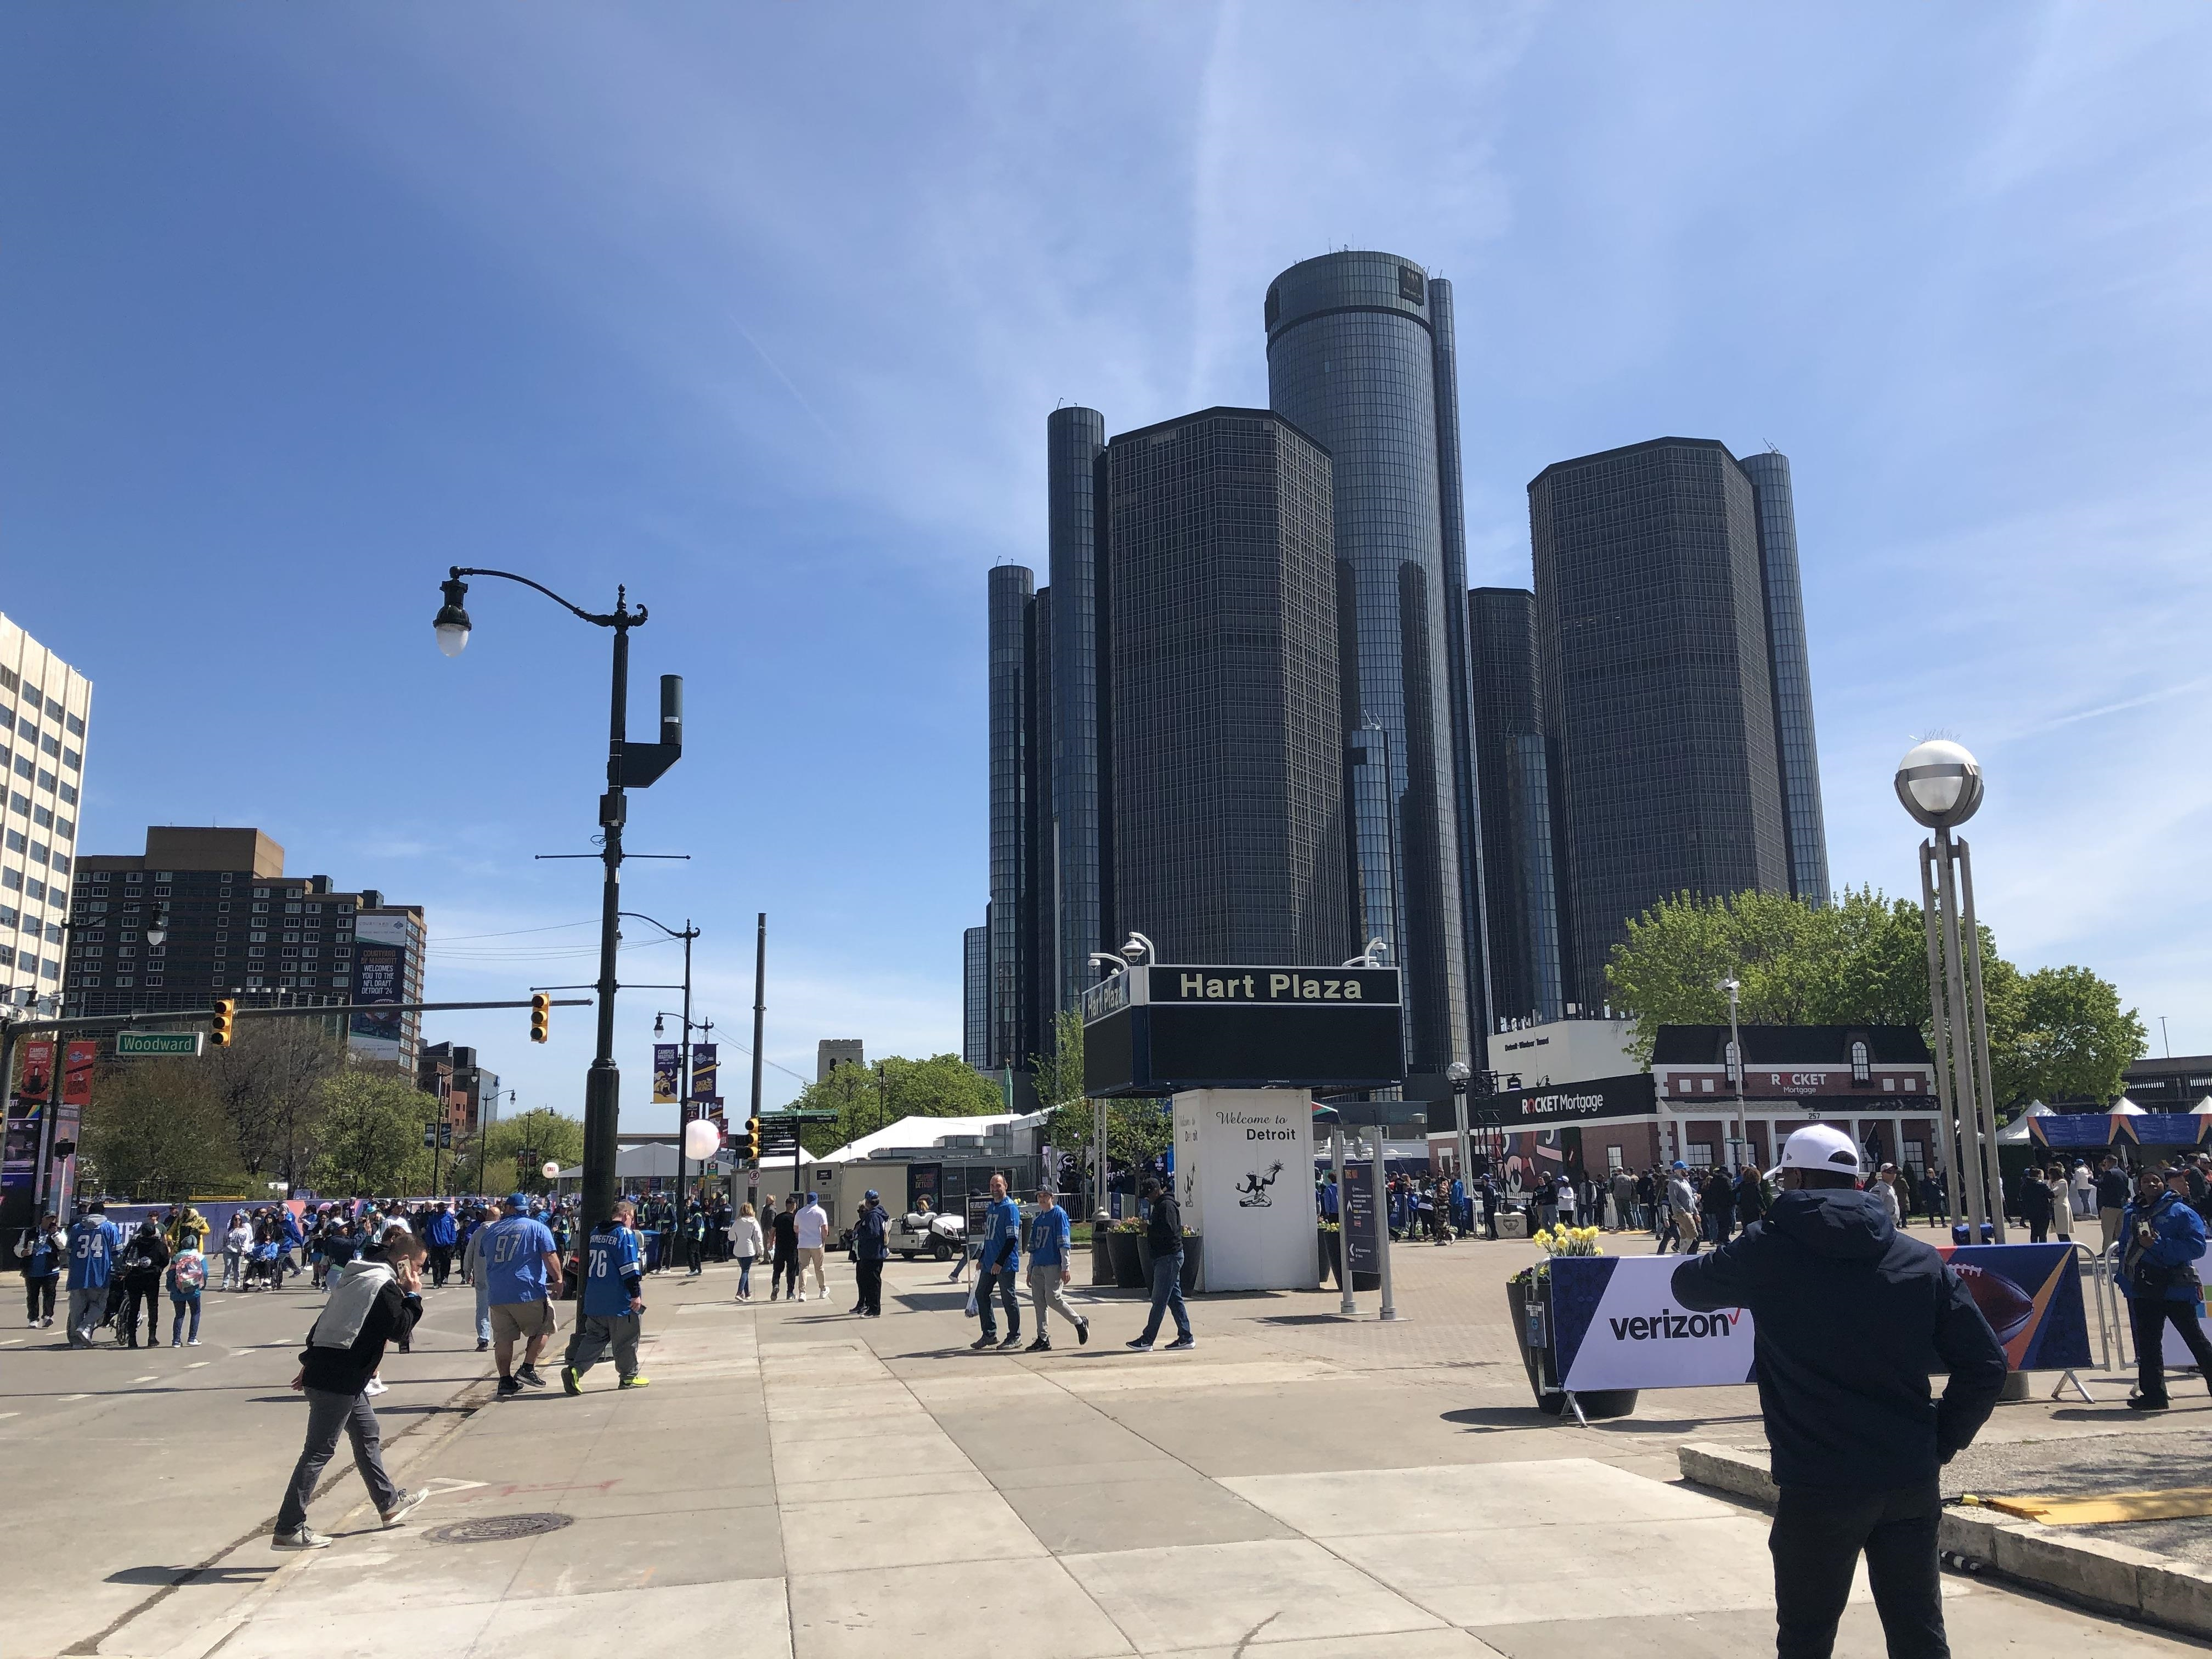 NFL Draft Experience kicks off in downtown Detroit